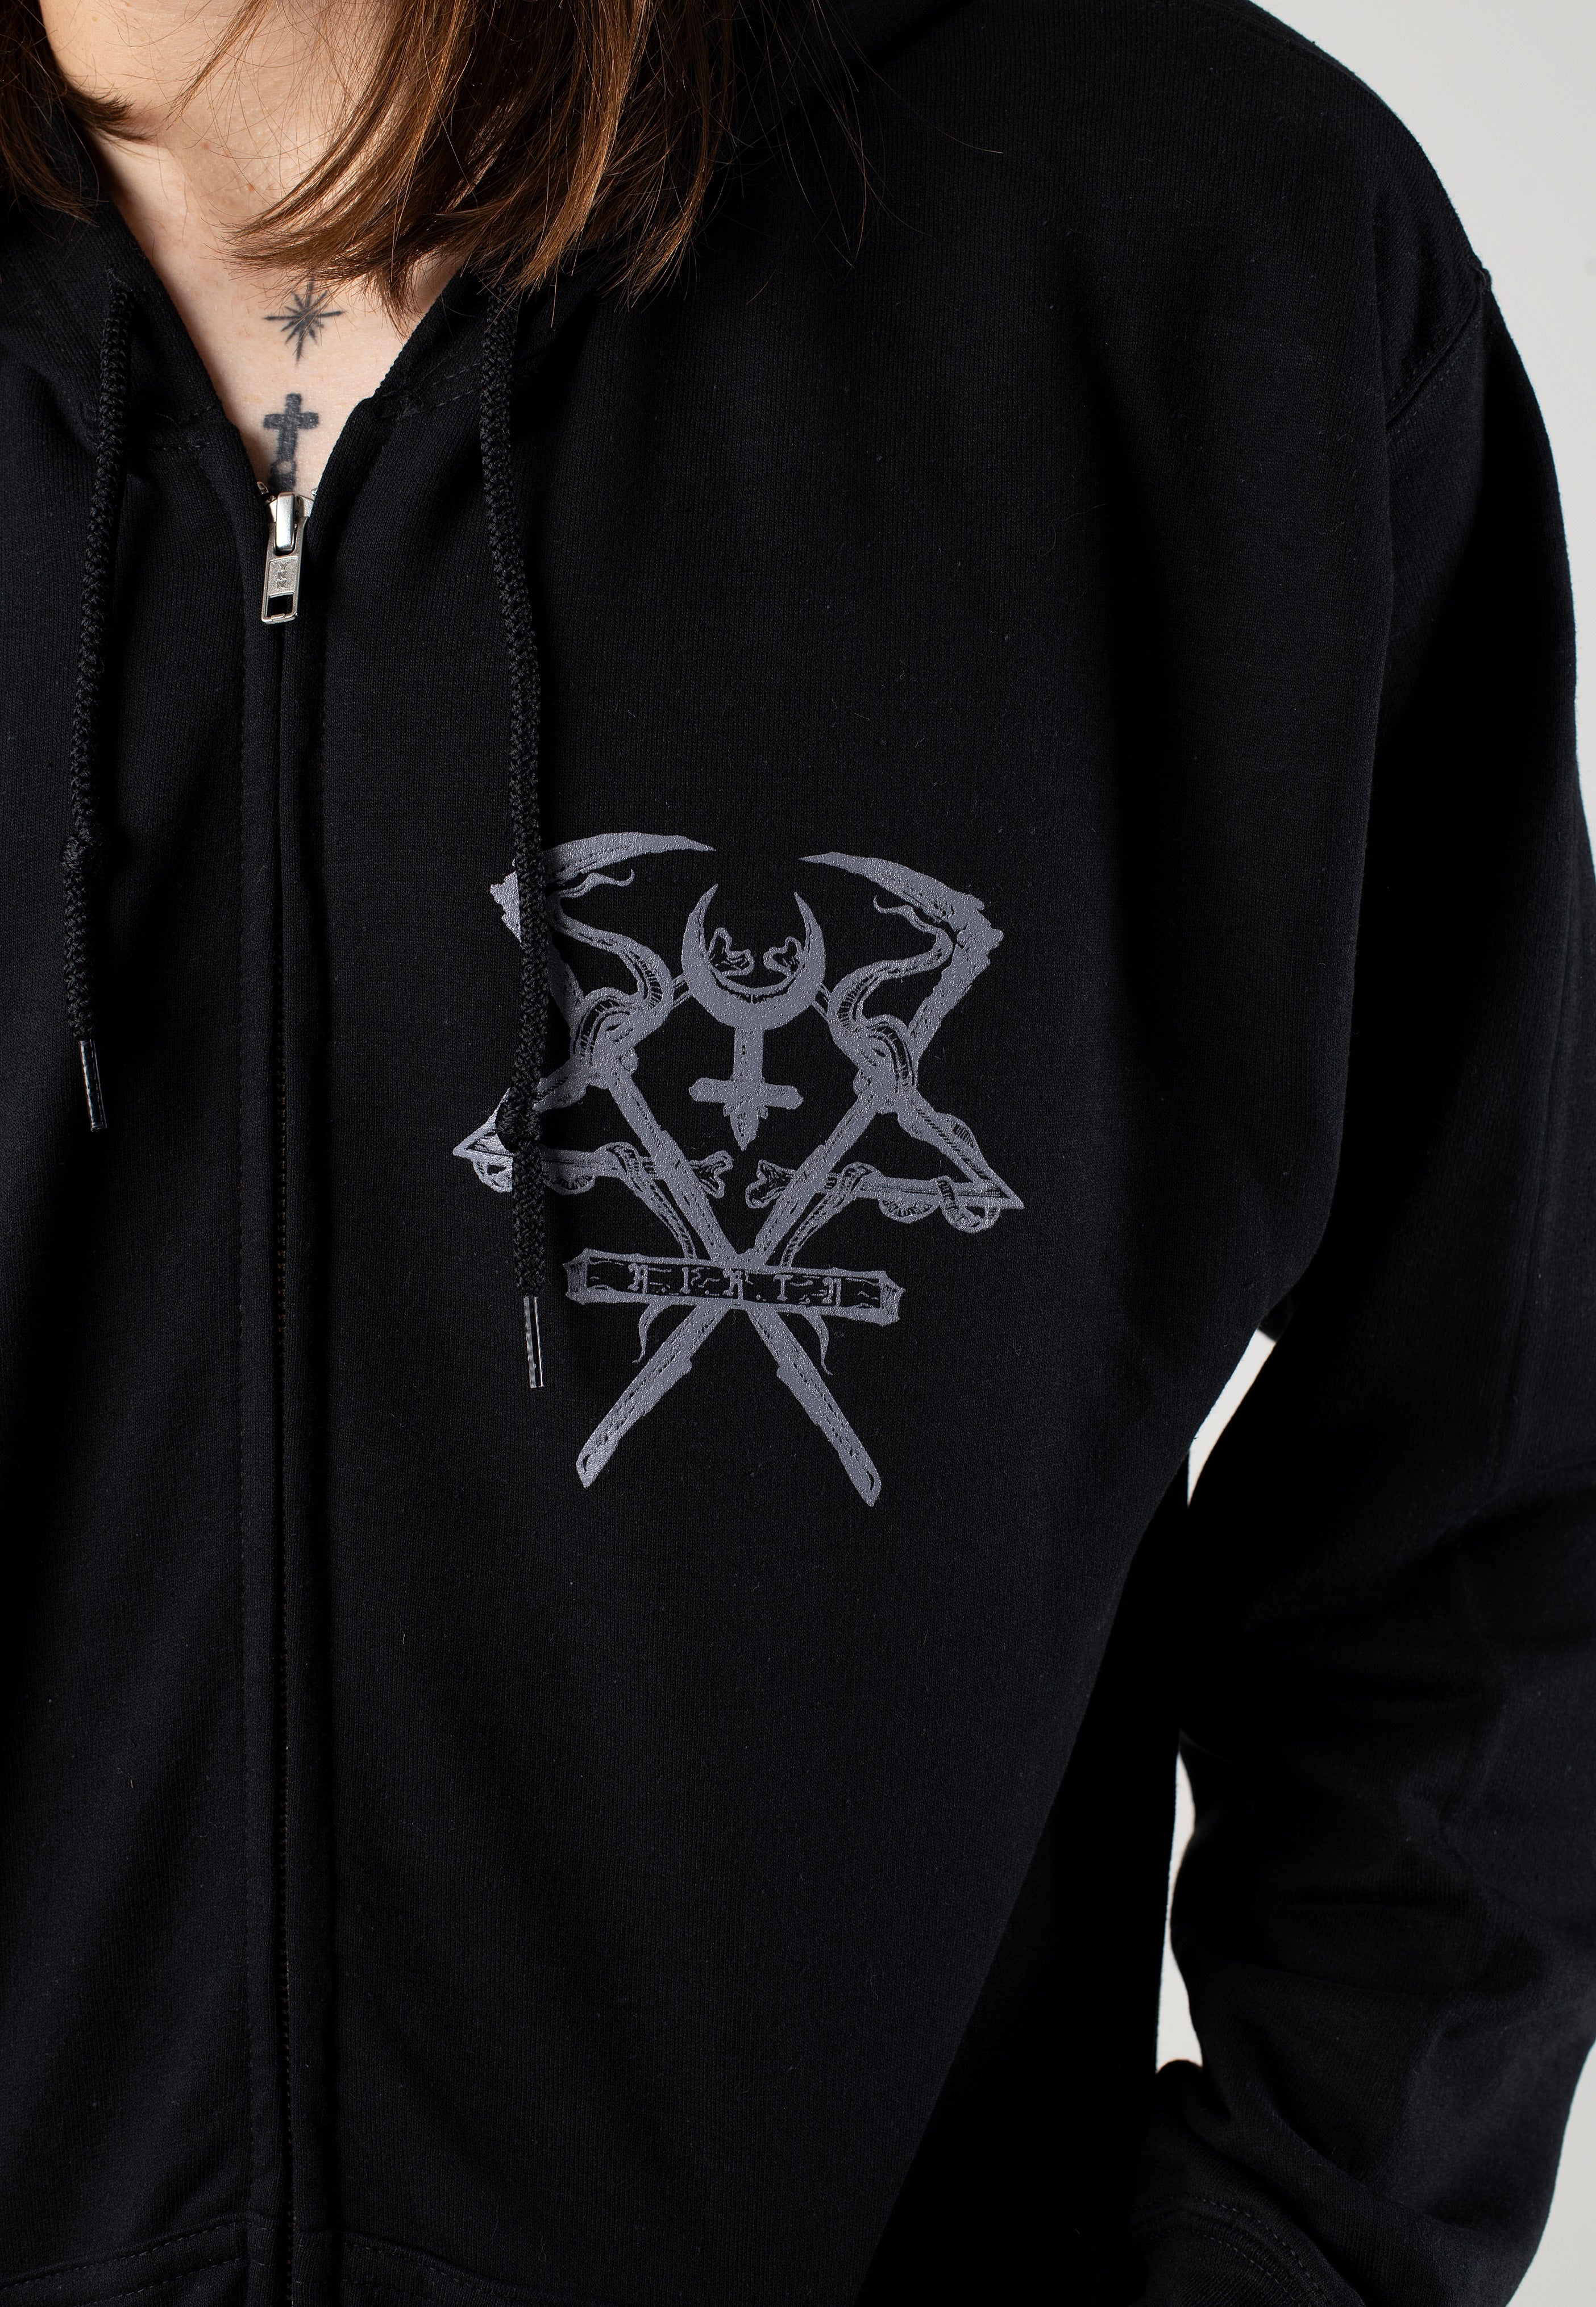 Lorna Shore - And I Return To Nothingness Cover - Zipper | Men-Image